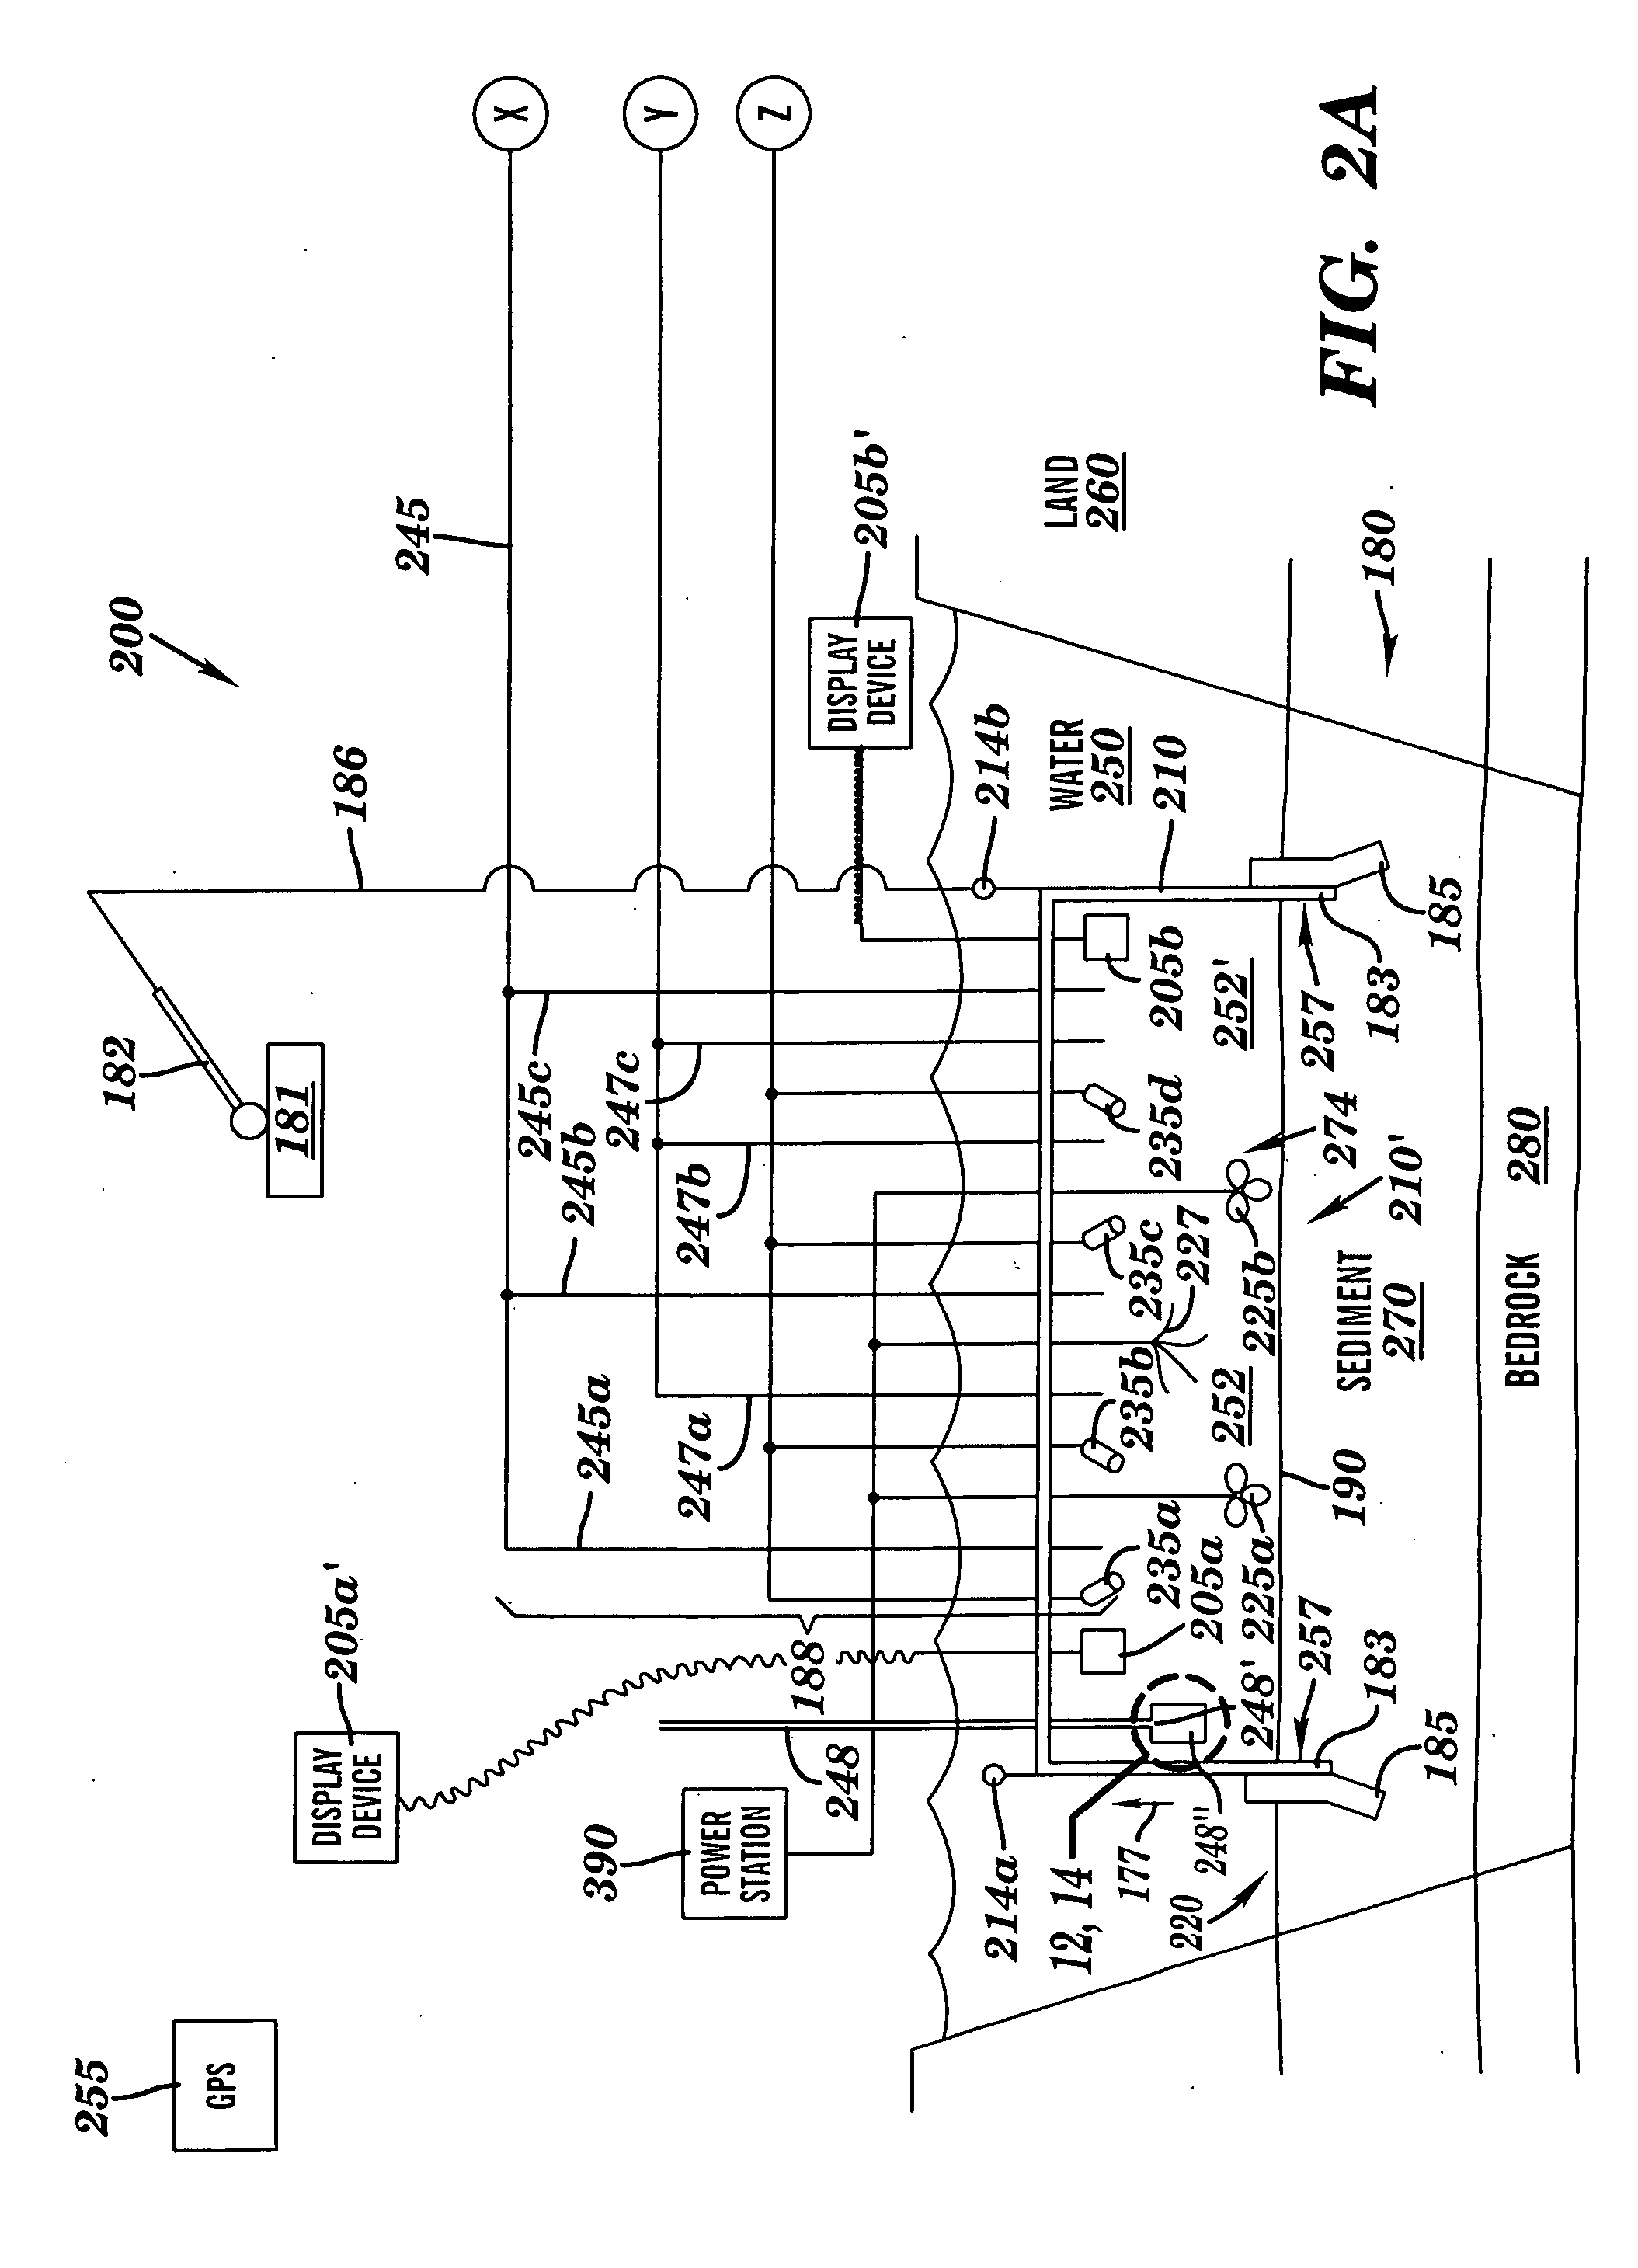 Apparatus, system and method for remediation of contamination